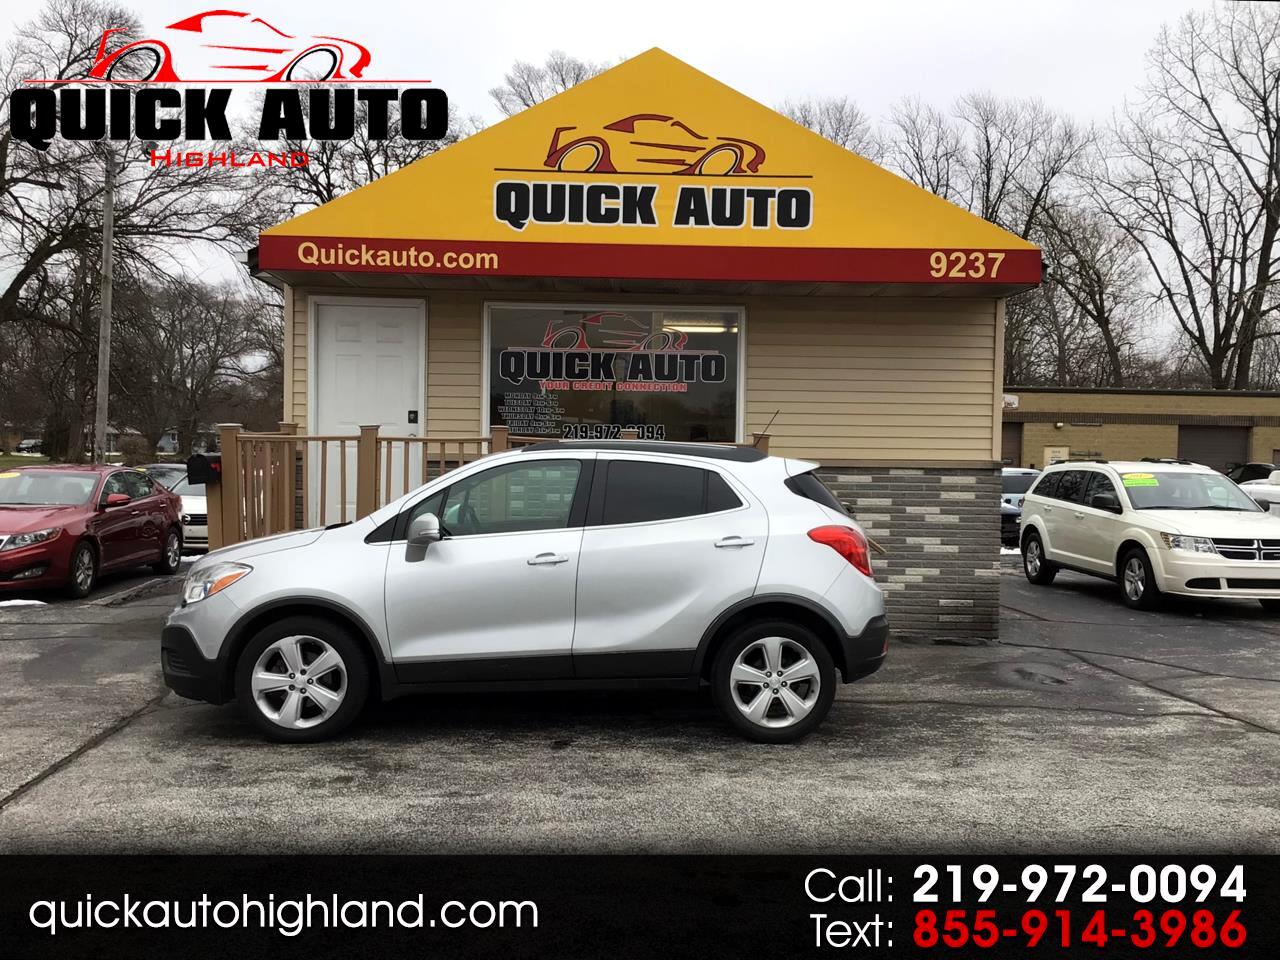 Used Cars & Trucks For Sale, Highland IN